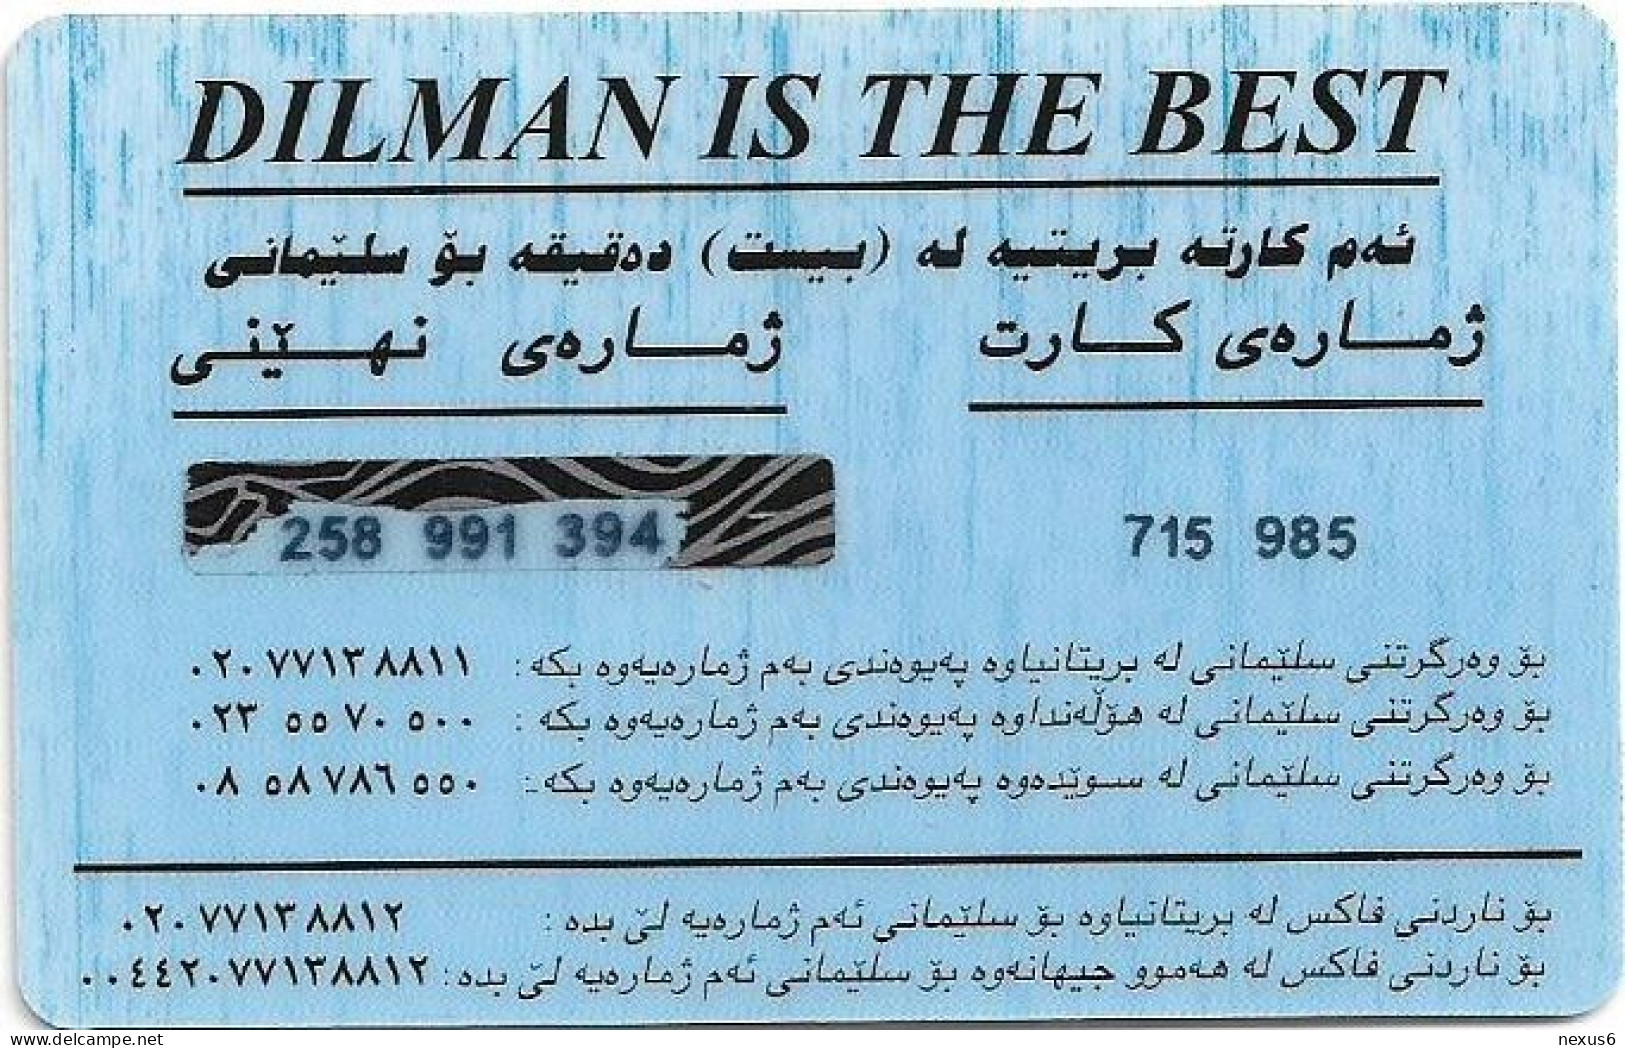 UK & Others - DILMAN (Kurdistan Calls) - Dilman Is The Best, Eagle (Light Blue Issue), Remote Mem. No FV, Used - [ 8] Companies Issues